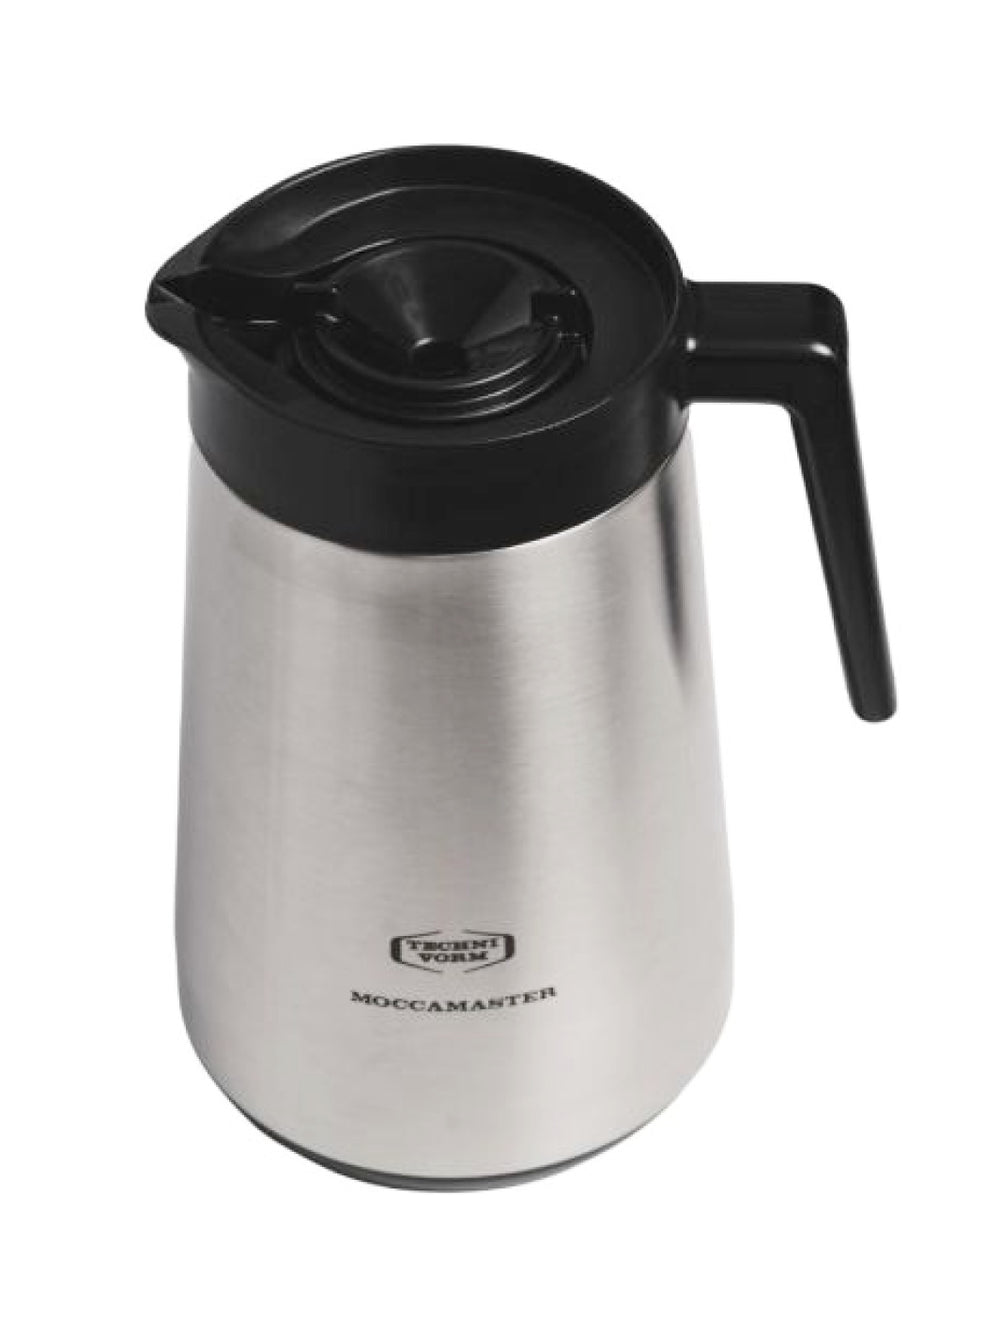 TECHNIVORM Moccamaster Replacement Thermal Carafe